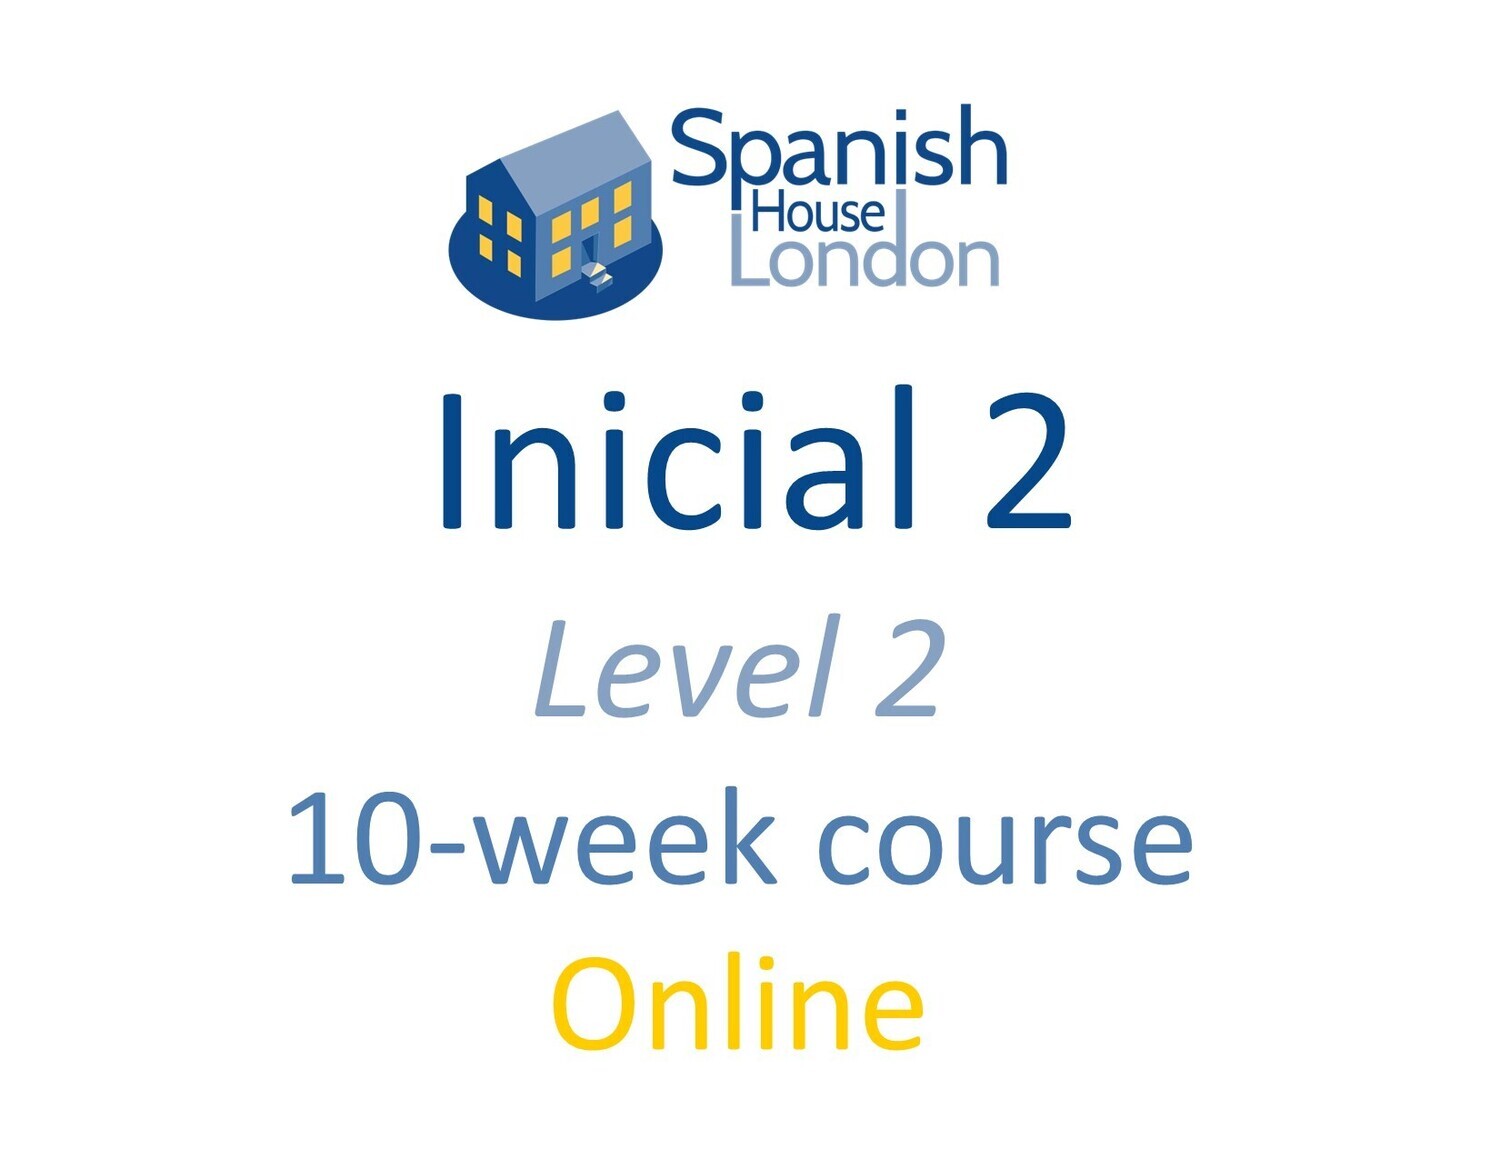 Inicial 2 Course starting on 14th November at 7.30pm Online